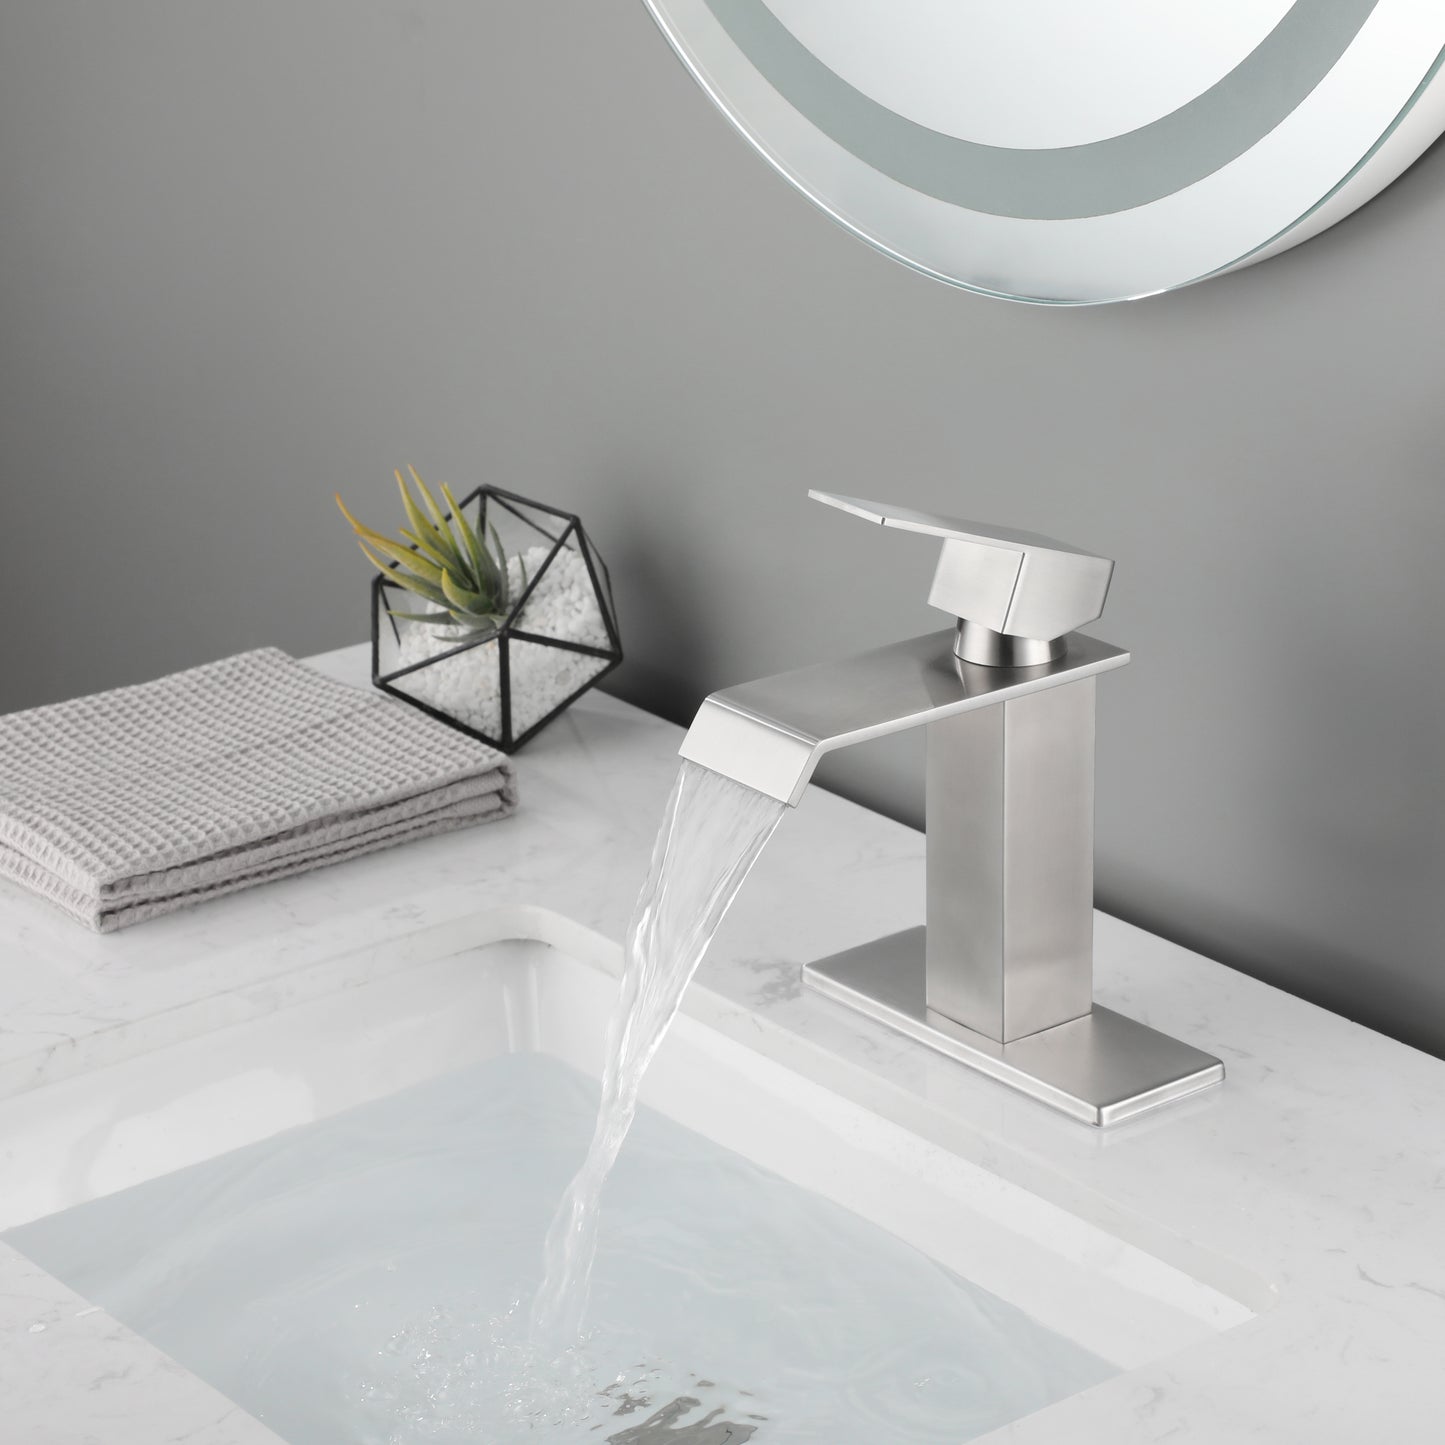 Waterfall Bathroom Faucet with Single Handle and Soft Water Flow